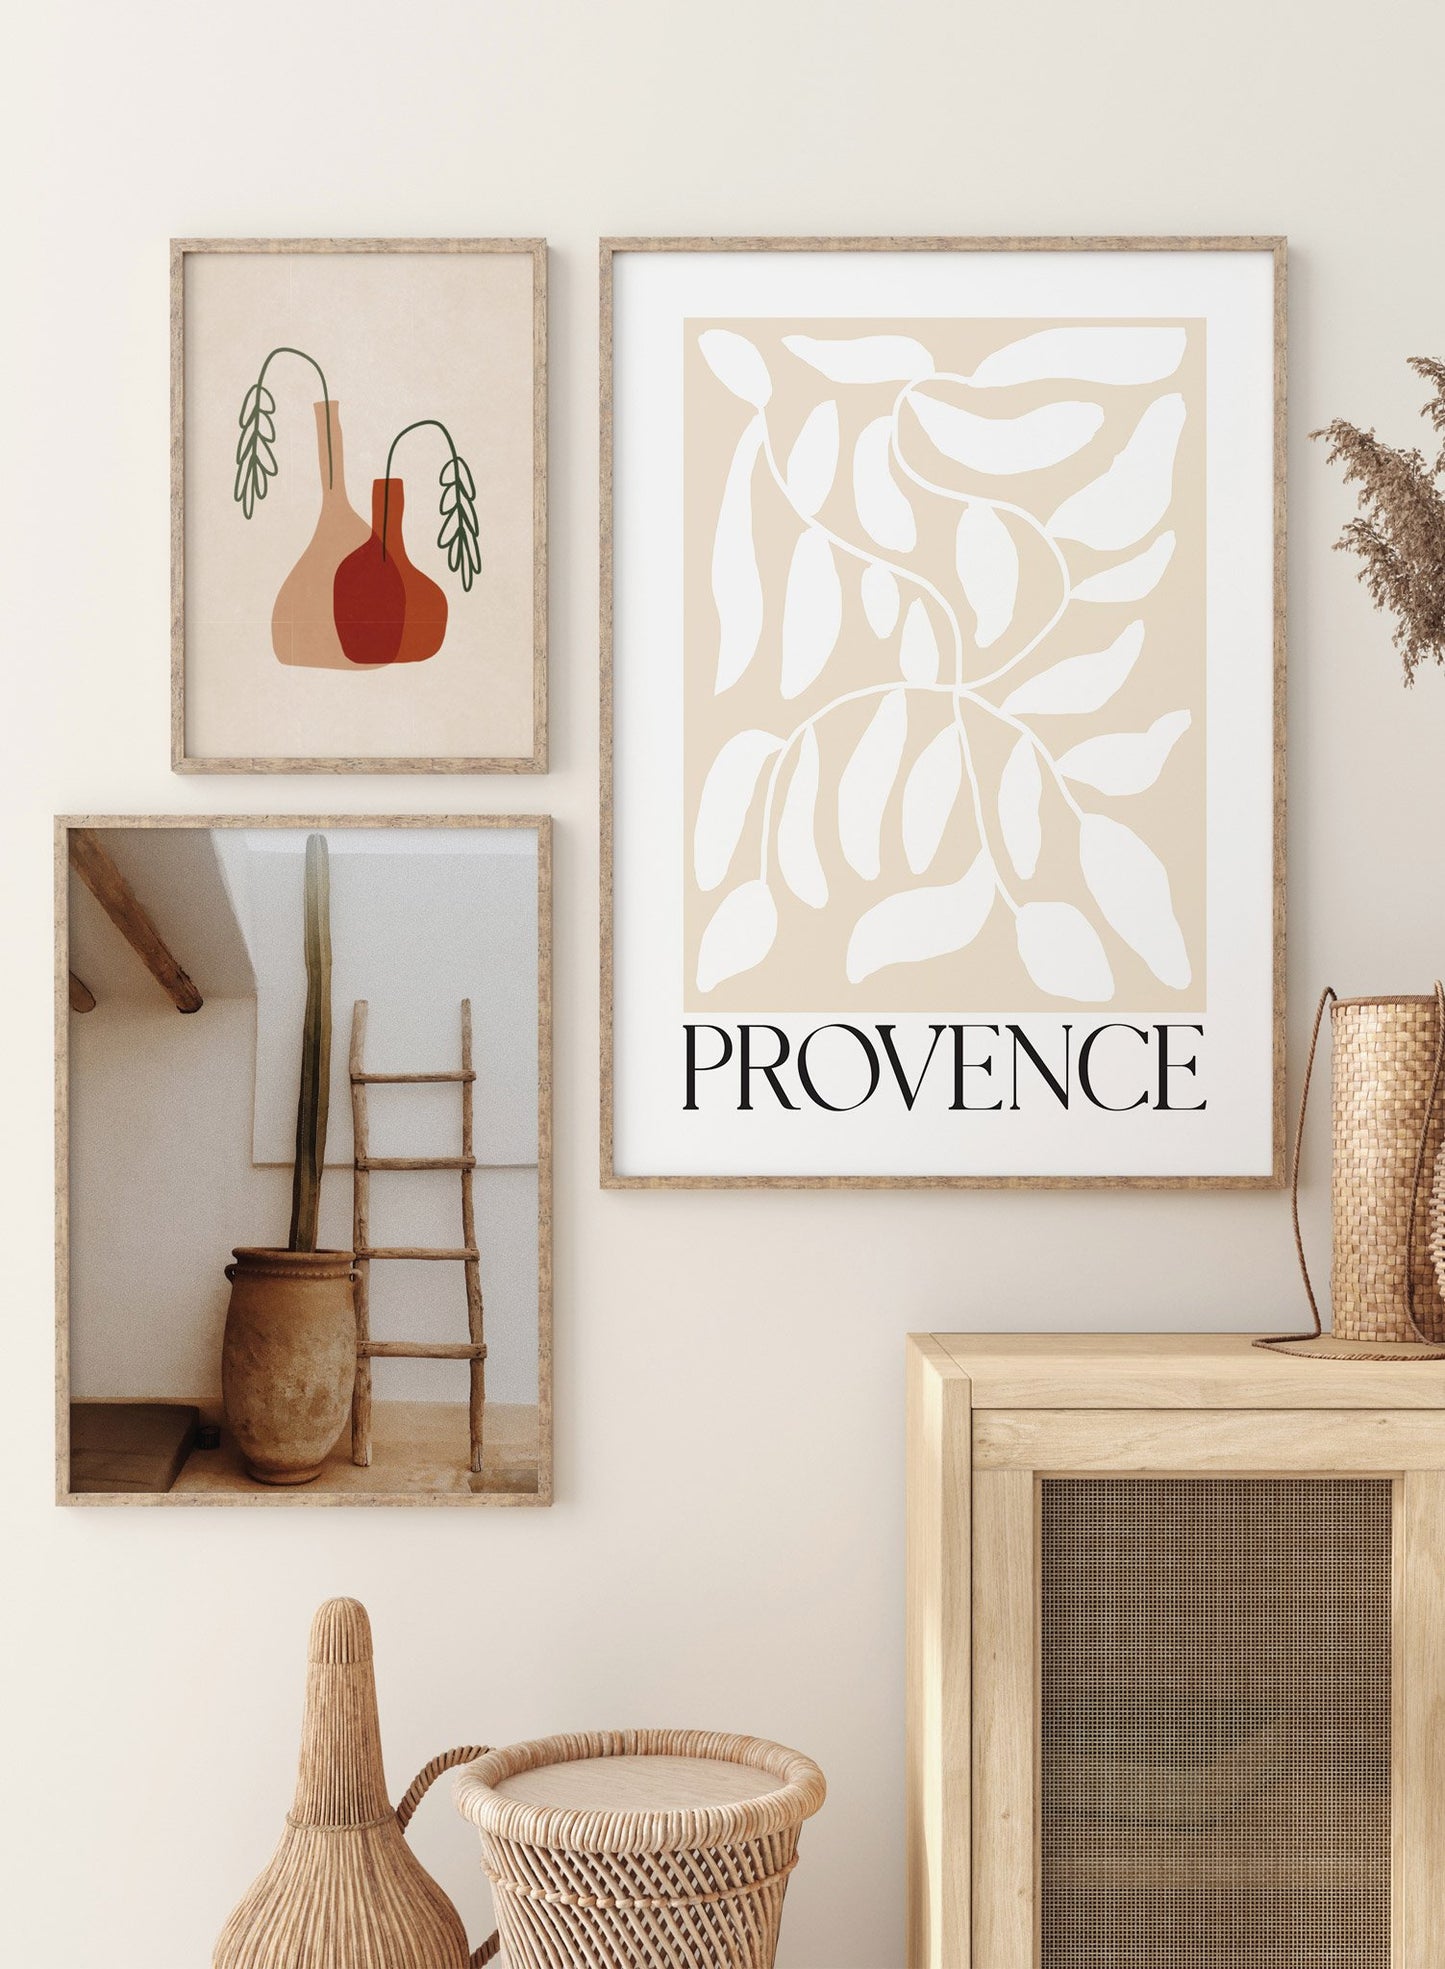 "Provence" is a minimalist  botanical illustration poster by Opposite Wall of vintage white leaves over a beige background and the a "Provence" typography print.